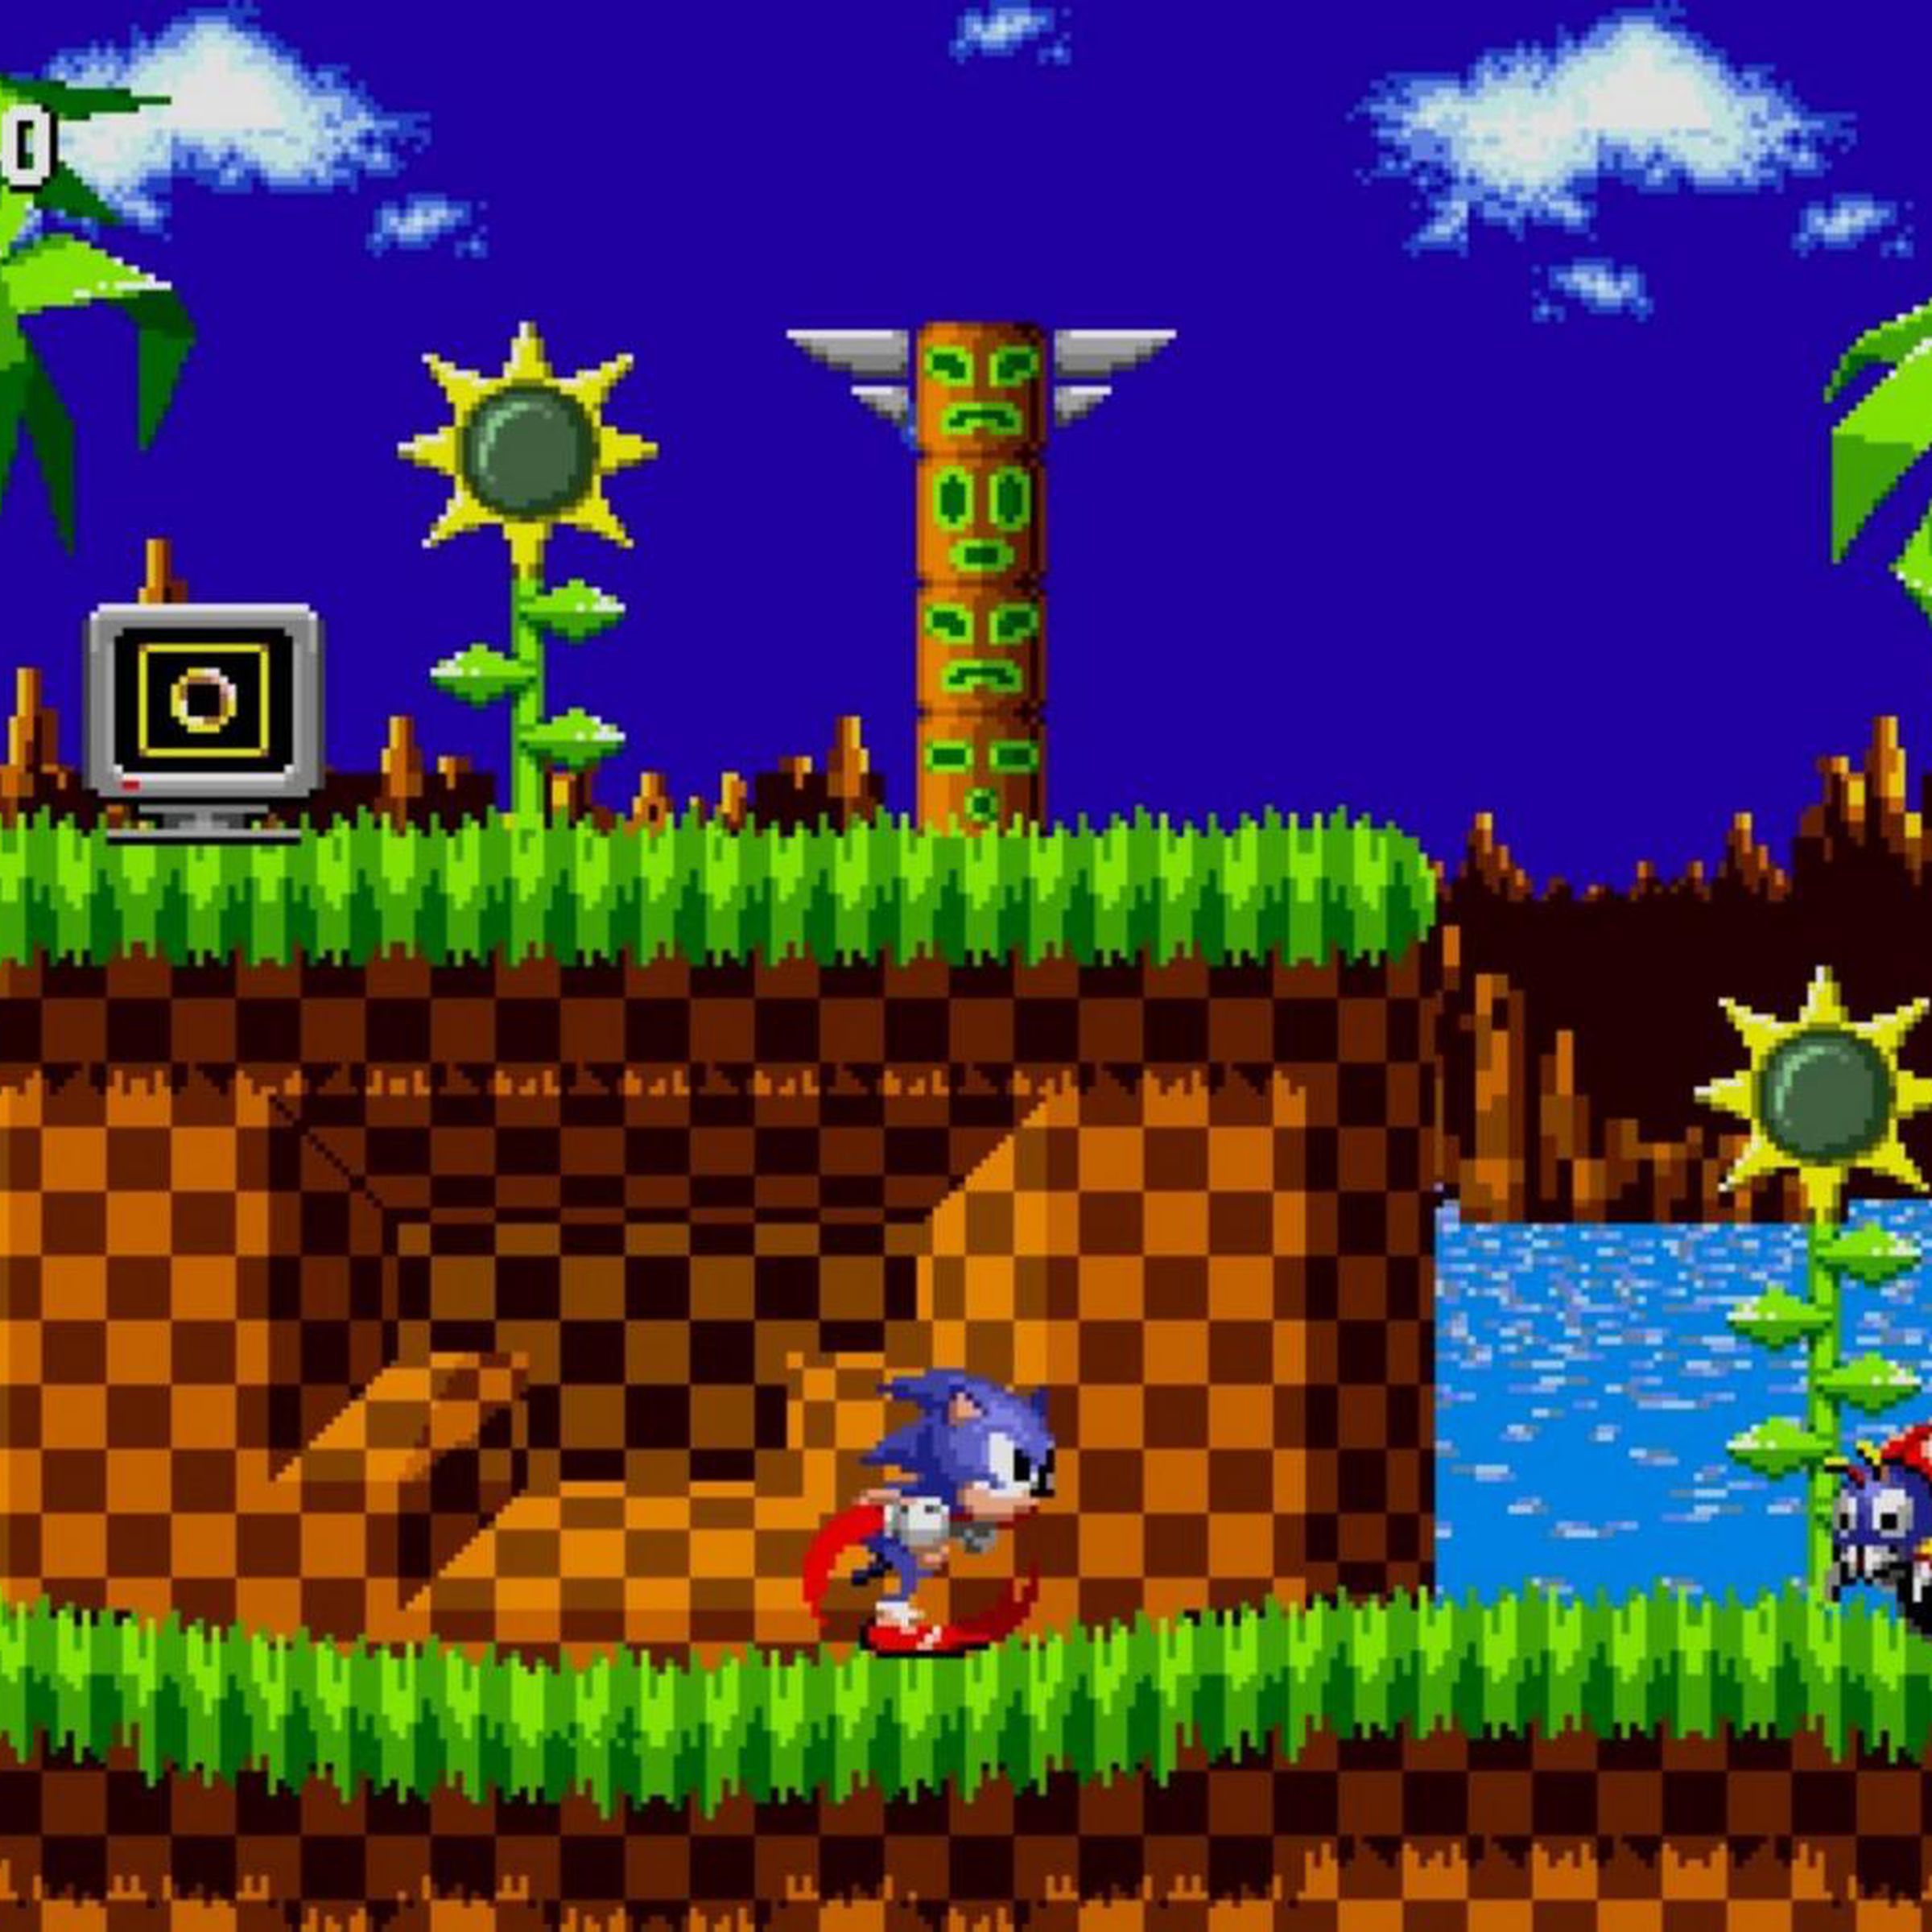 Screenshot from Sonic the Hedgehog game